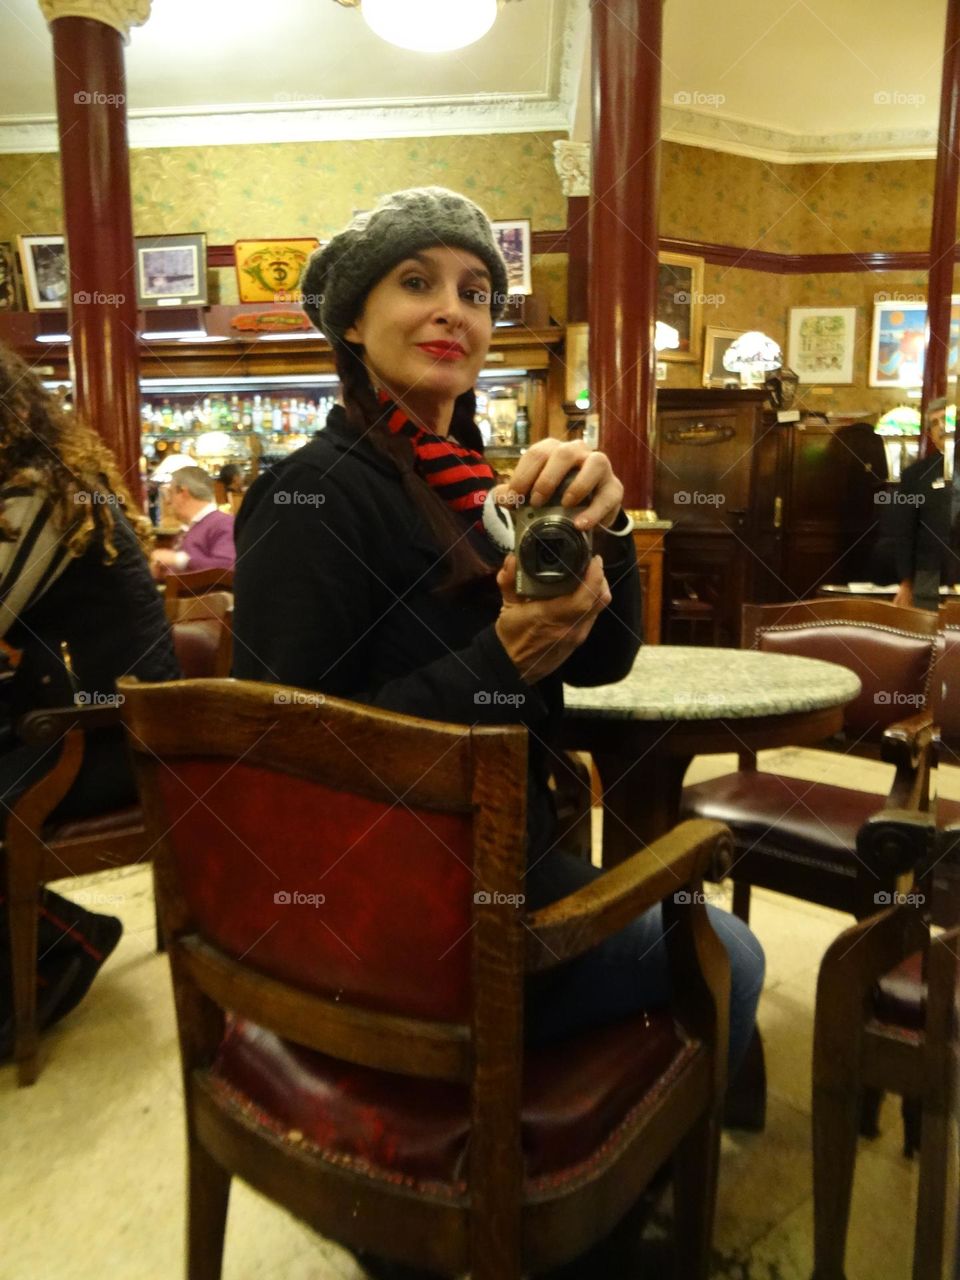 a selfie at a traditional Cafe in Buenos Aires